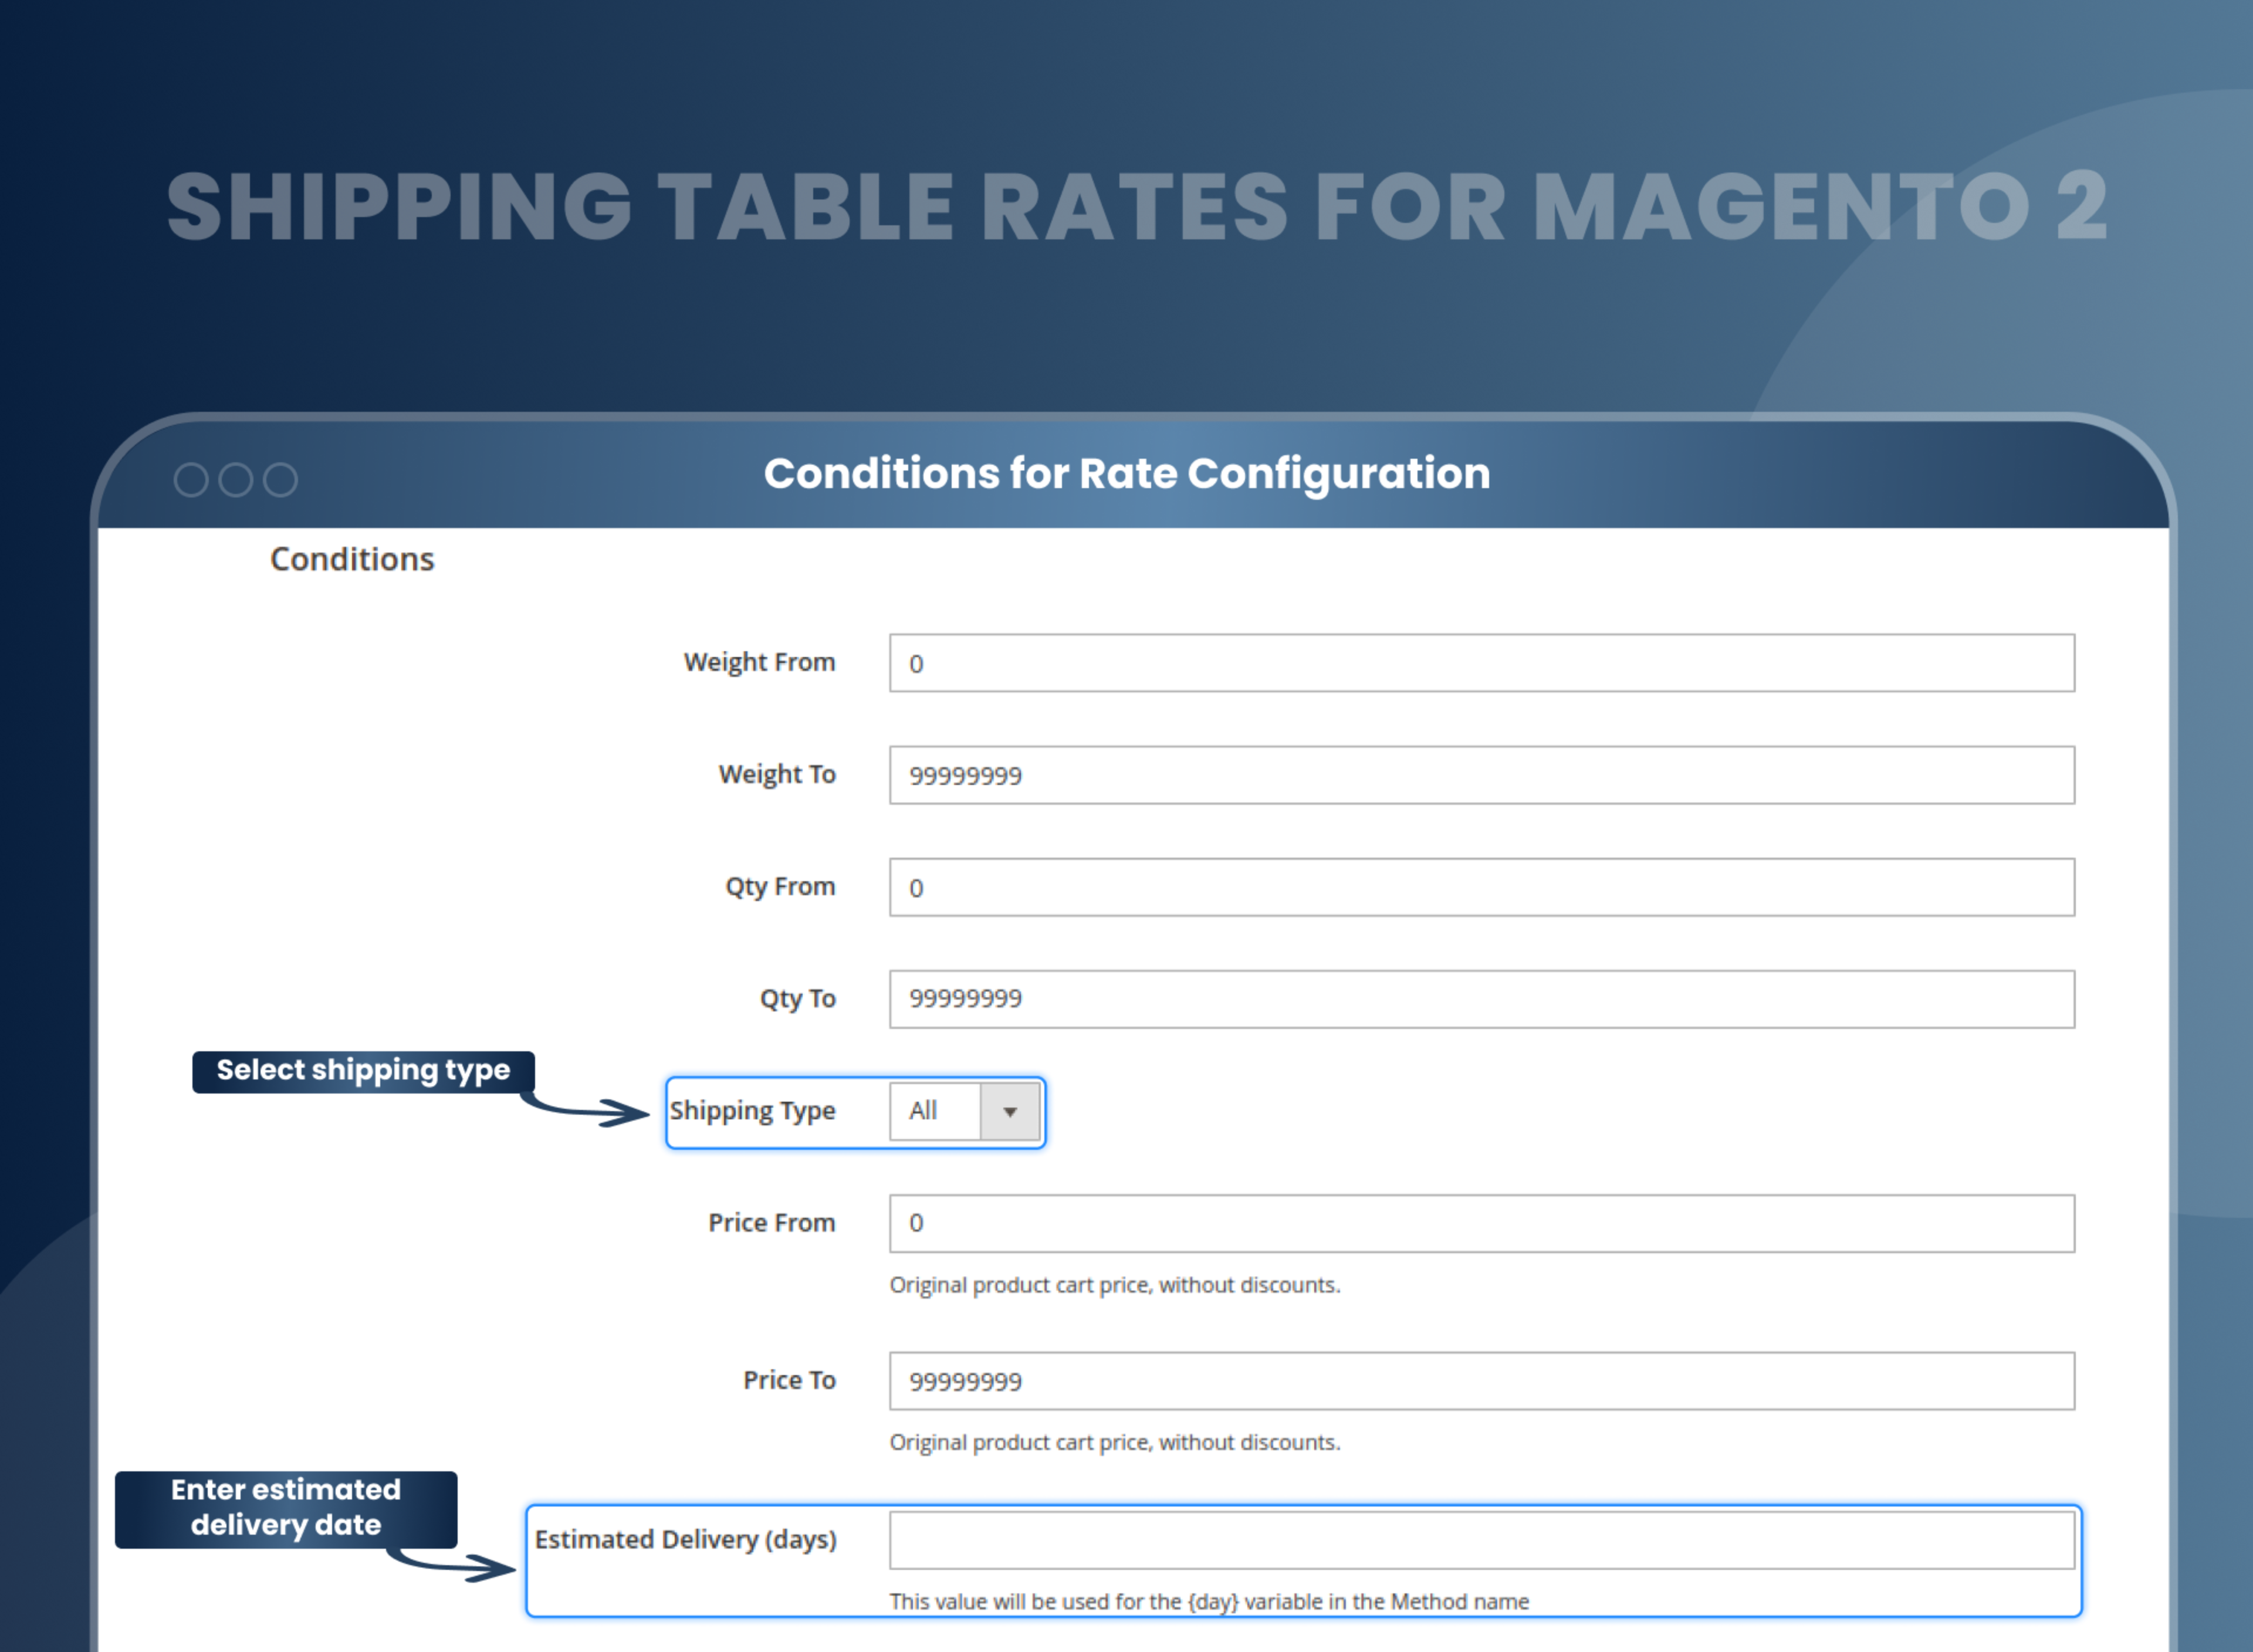 Conditions for Rate Configuration